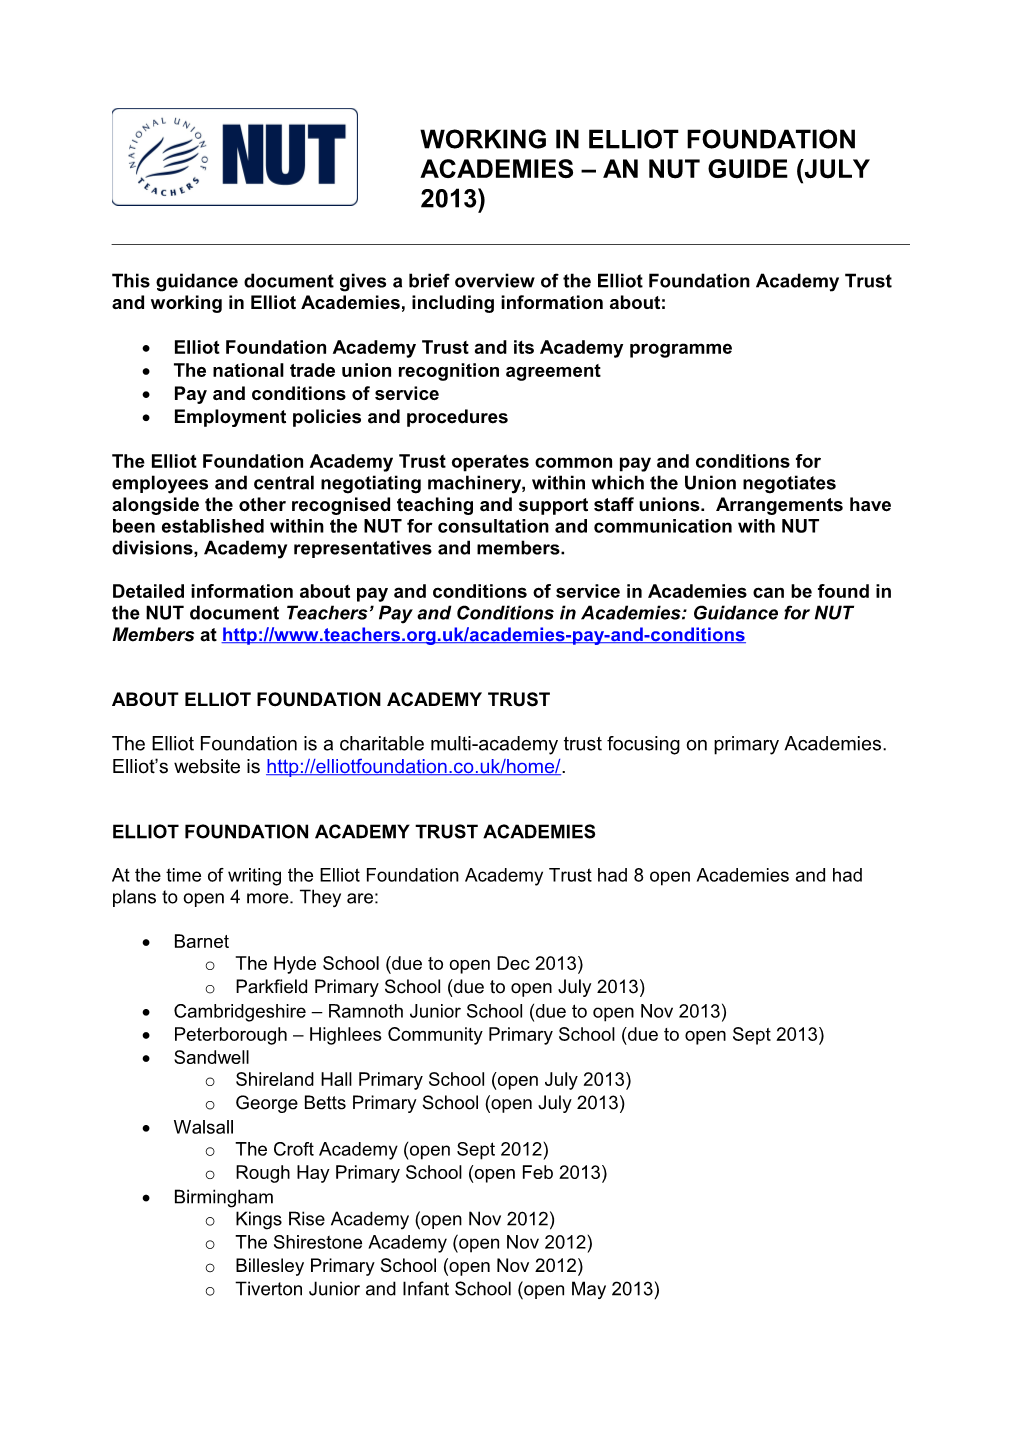 This Guidance Document Gives a Brief Overview of Theelliot Foundation Academy Trust And